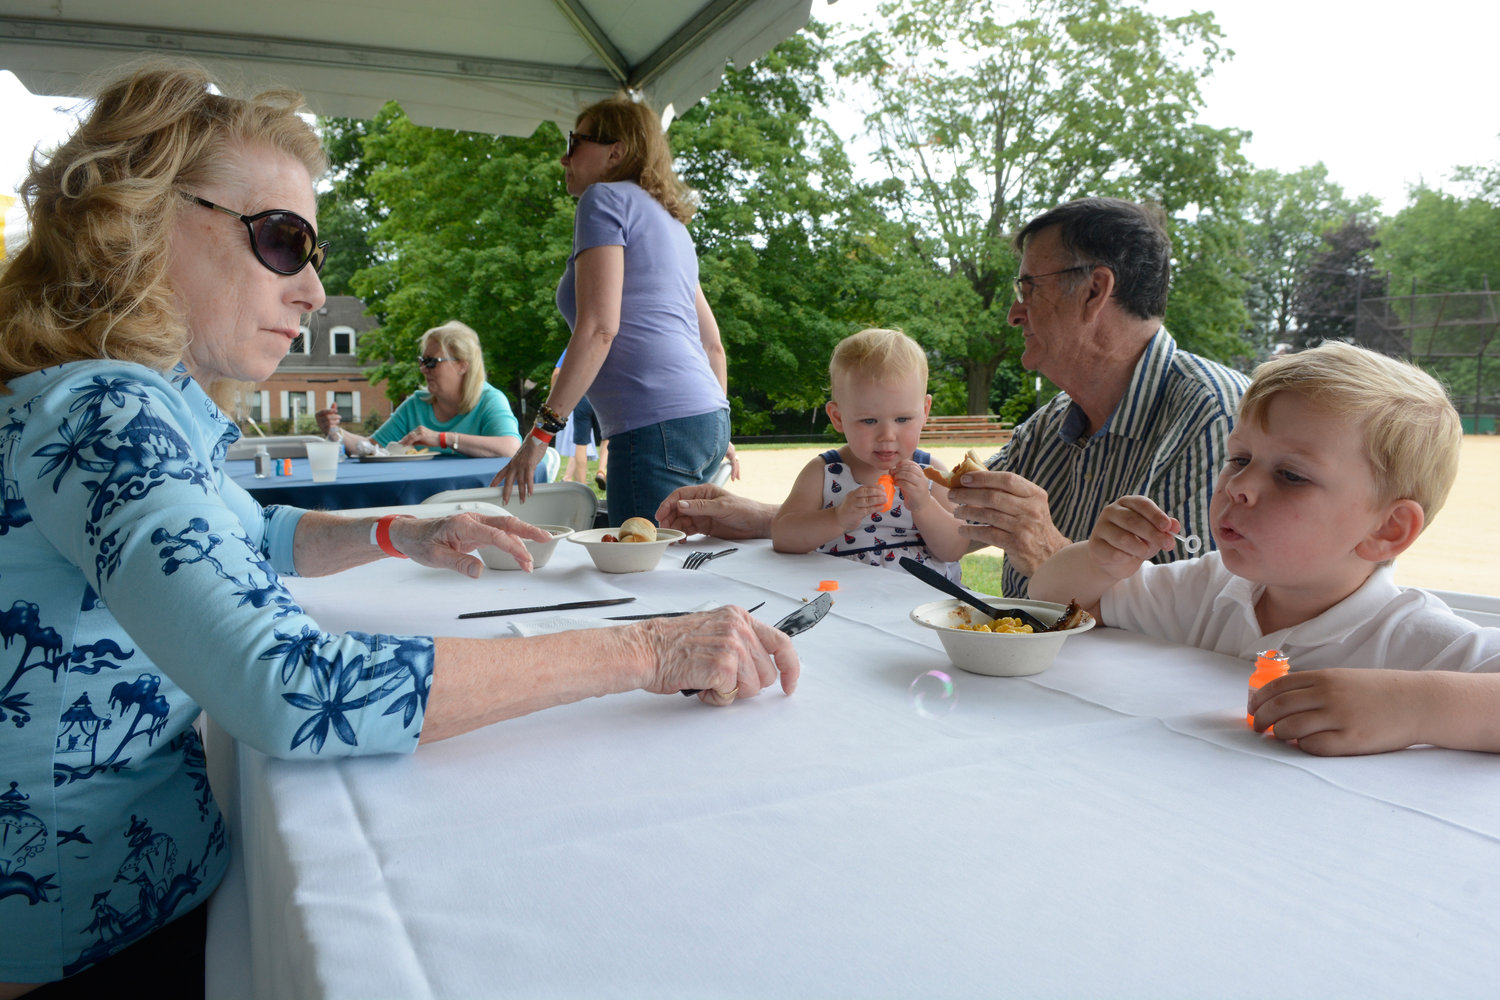 Kathy Cooper-McDermott, left, attends the parish family barbecue with husband Dr. Ed McDermott, M.D.; and their grandchildren, 20-month-old Nora Mahoney and 4-year-old Patrick Mahoney.